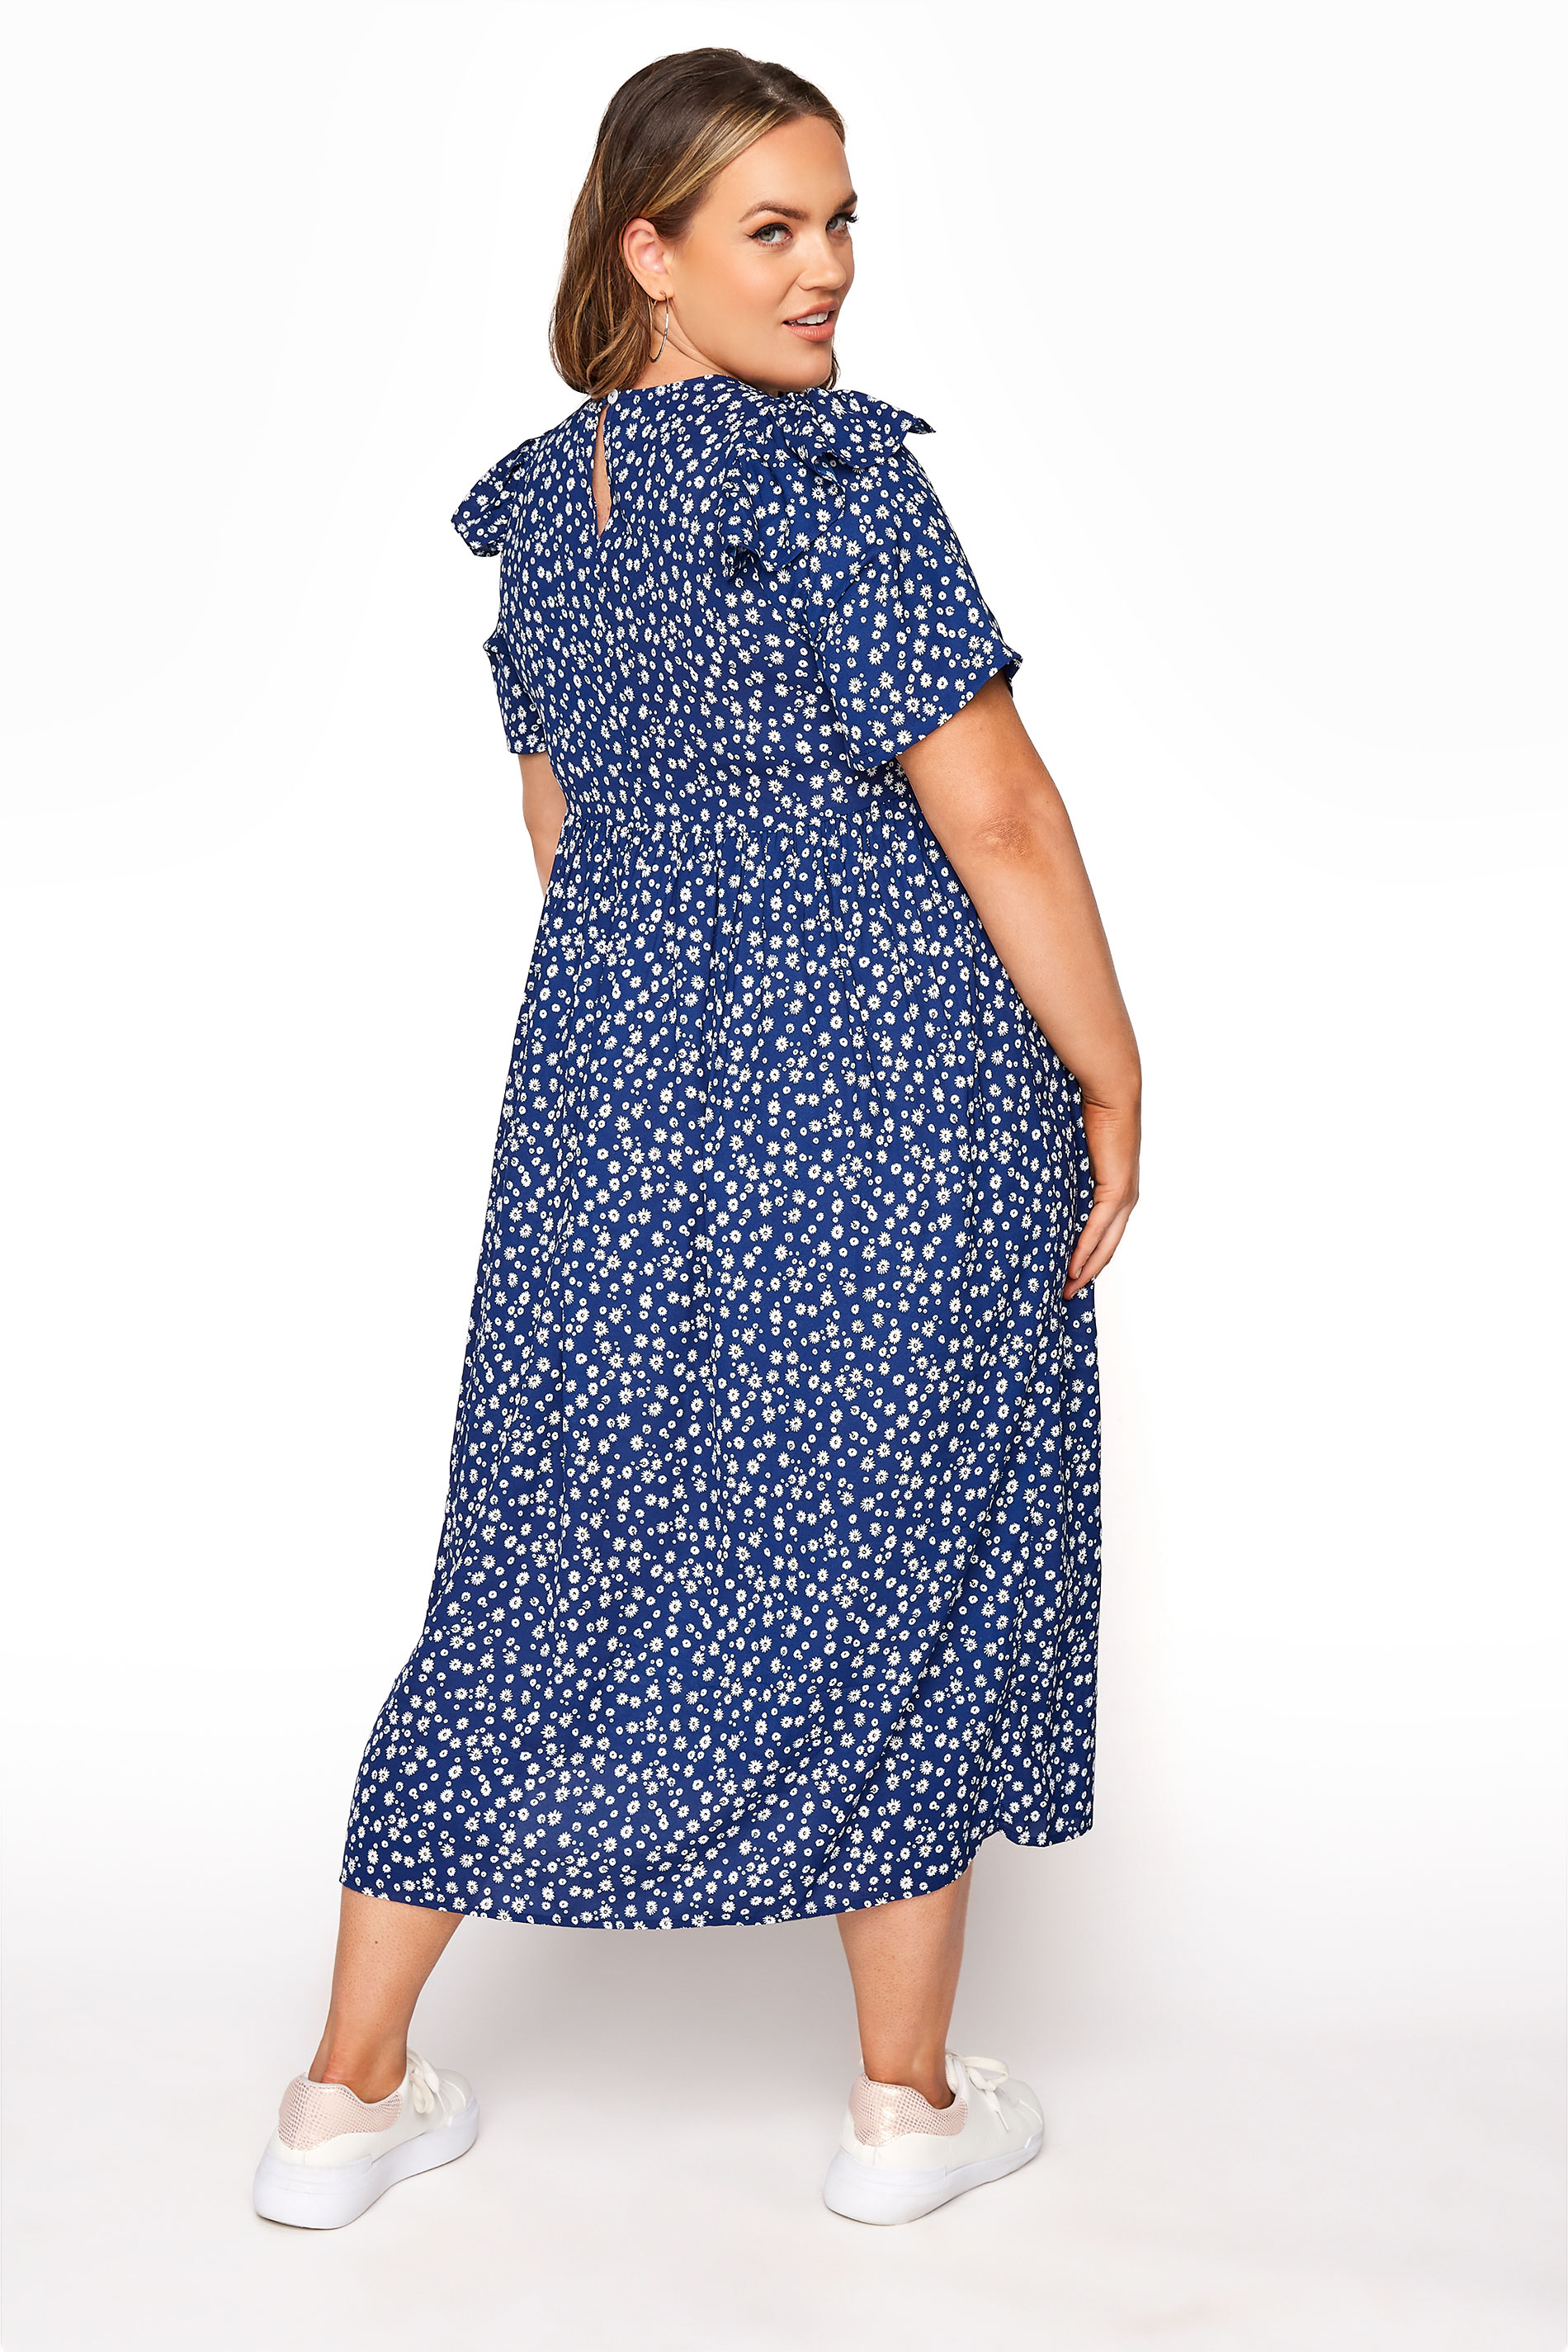 LIMITED COLLECTION Blue Ditsy Frill Shoulder Dress | Yours Clothing